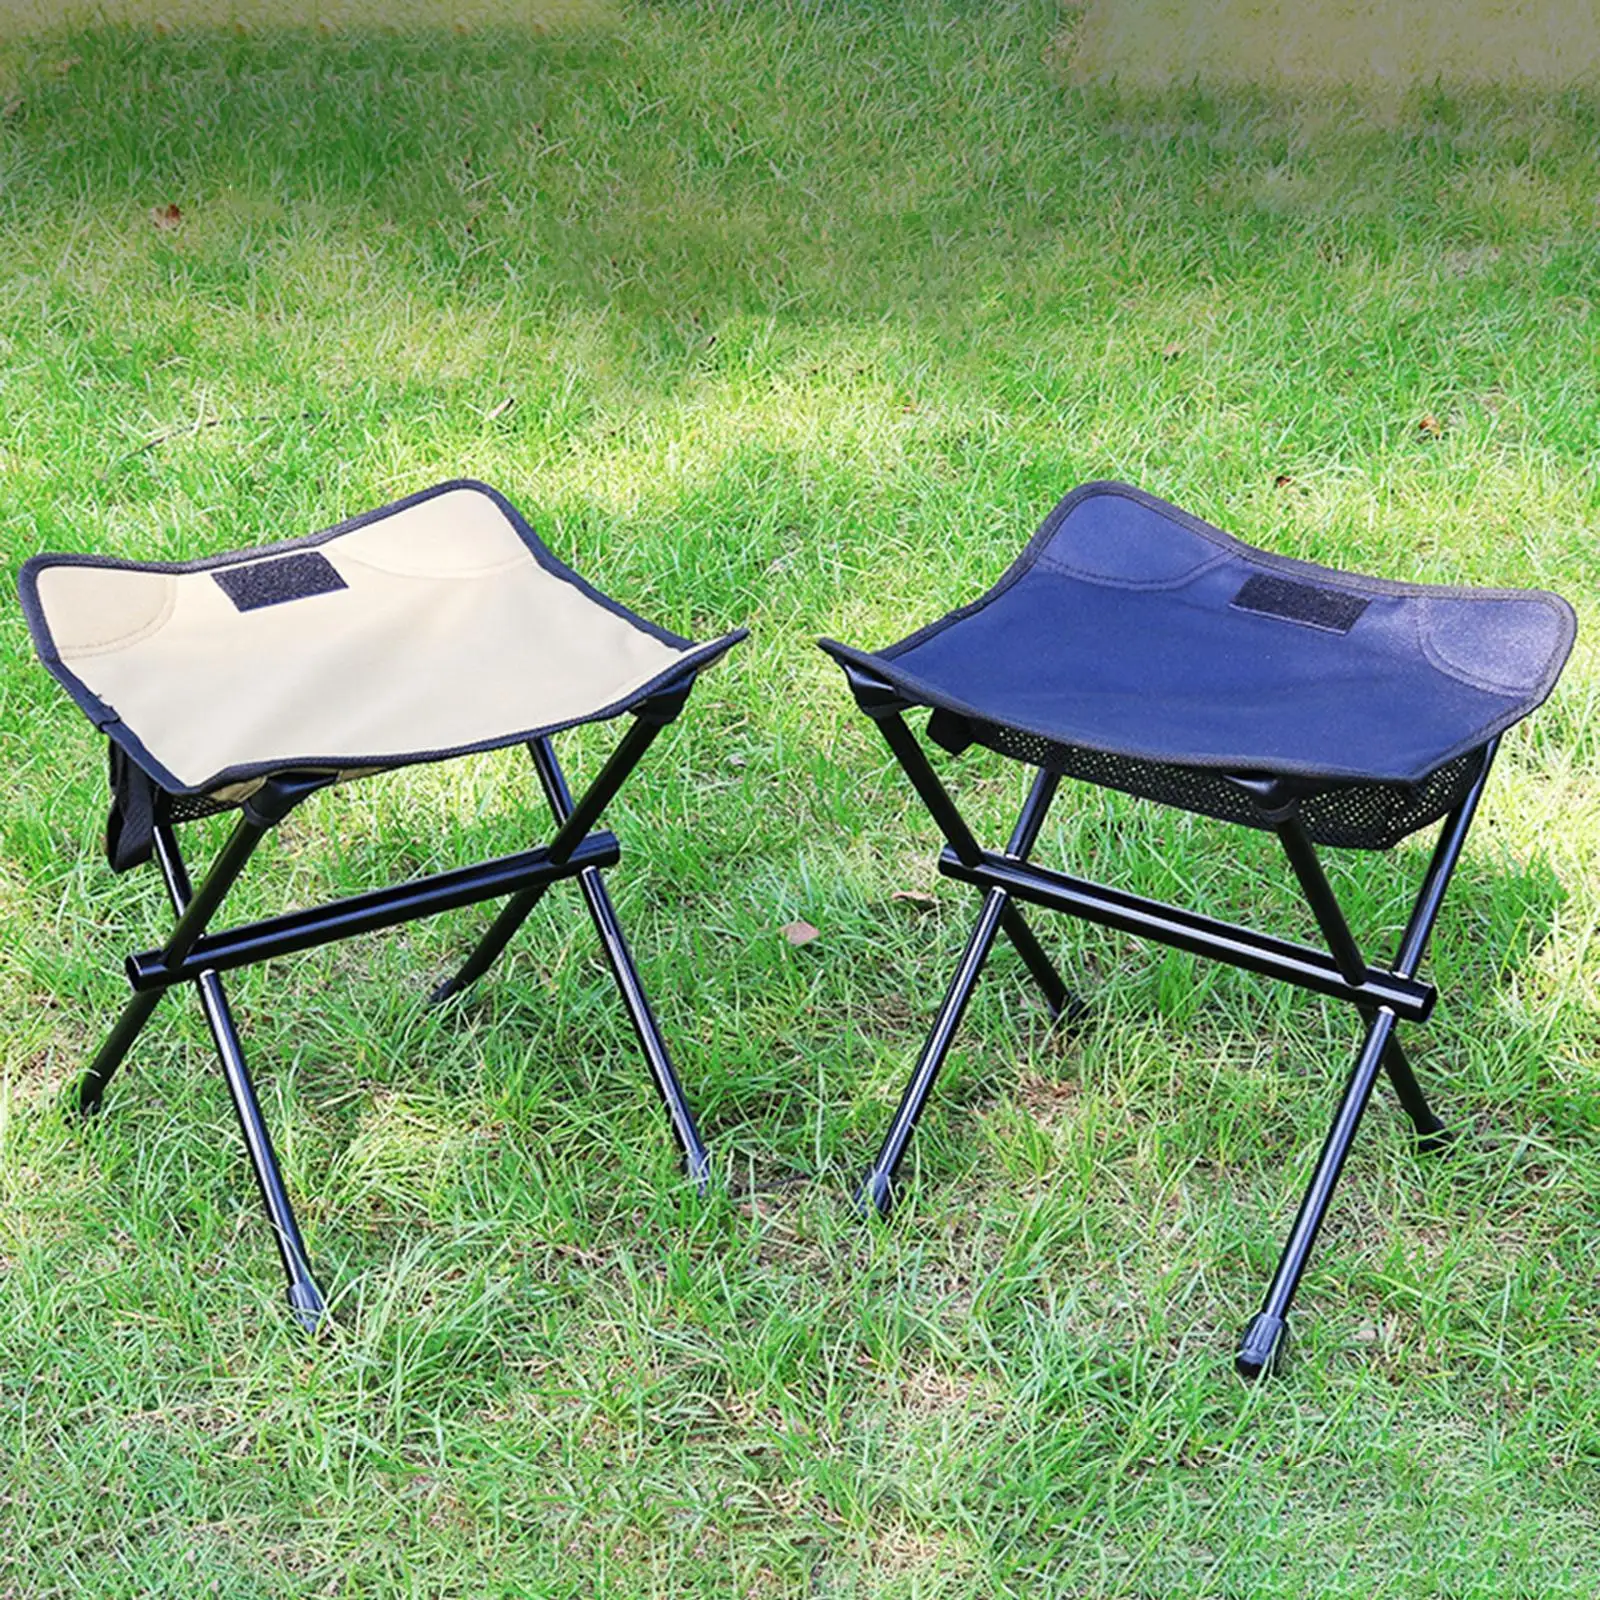 Outdoor Folding Chair Foldable Camping Stool Collapsible Stool Hiking Fishing - £20.19 GBP